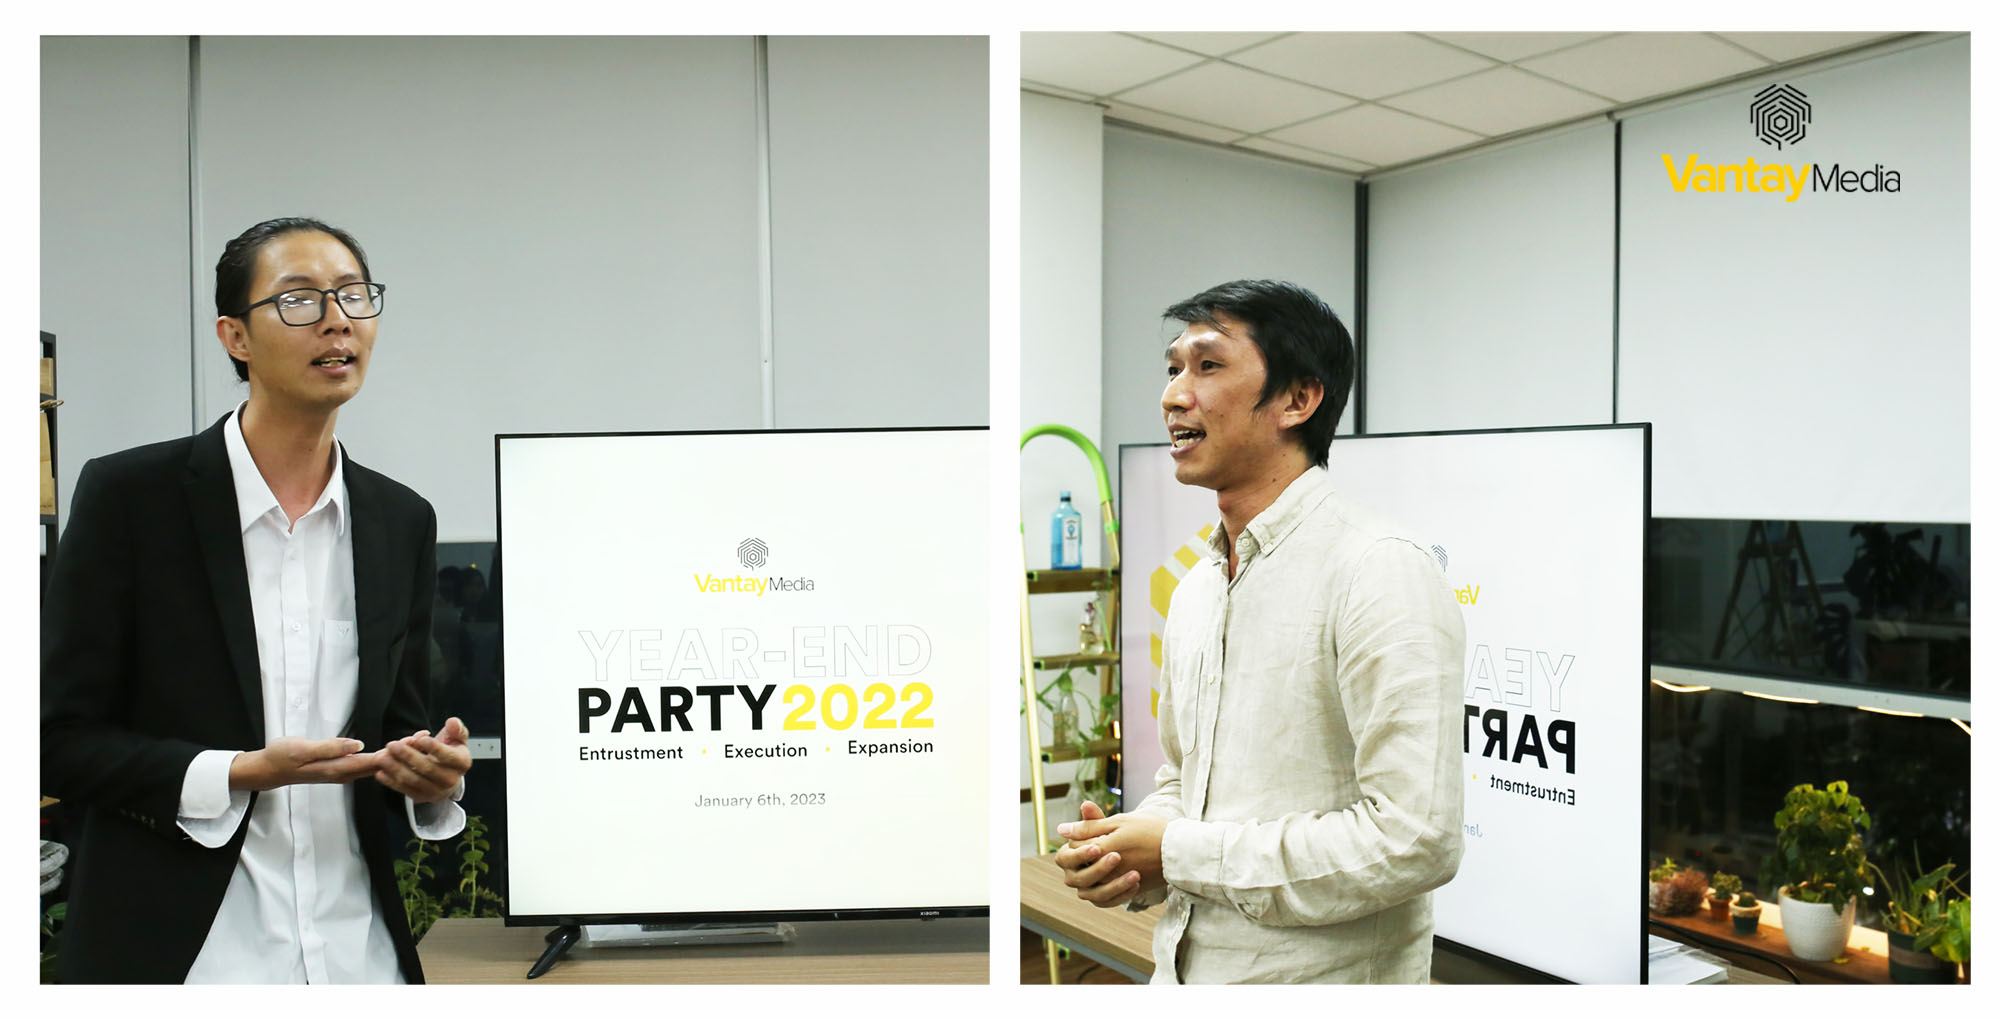 Some moments in year end party 2022 of Van Tay Media